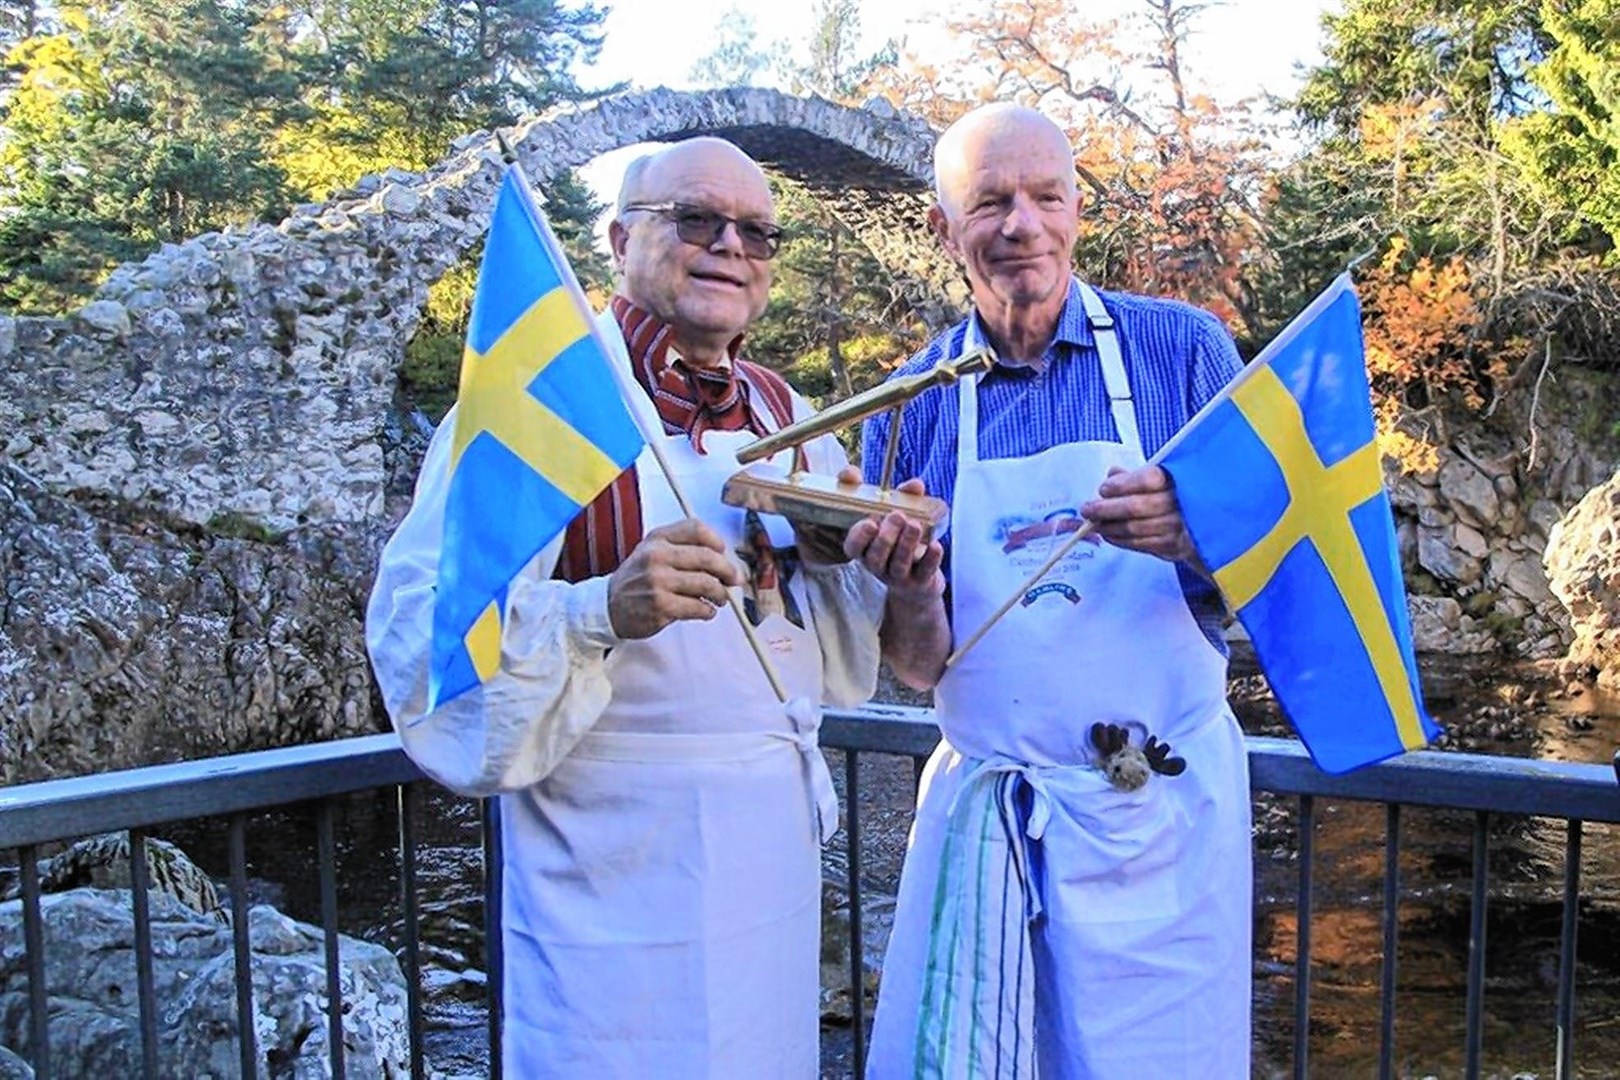 This year's world porridge champs has a very different format compared to other years due to the pandemic. Pictured are 2018 winners Calle Myrsell and Per Carlsson from Sweden in front of the village's old packhorse bridge.